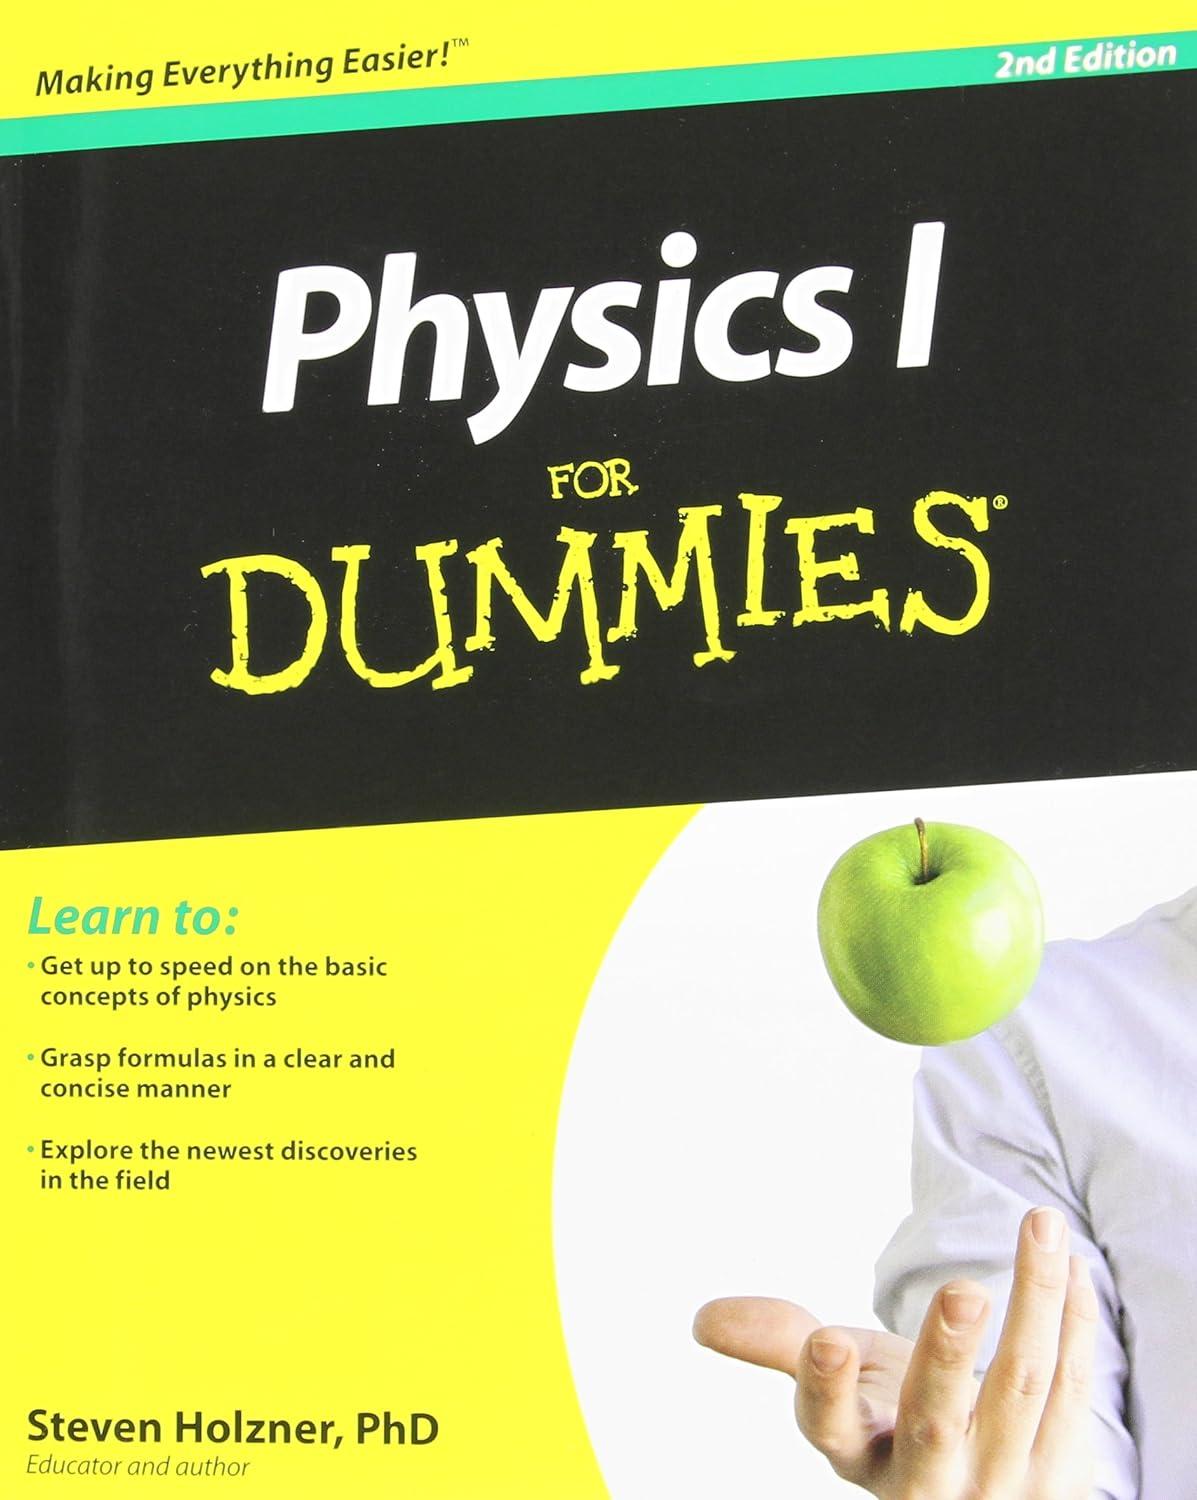 physics i for dummies 2nd edition phd steven holzner 0470903244, 978-0470903247